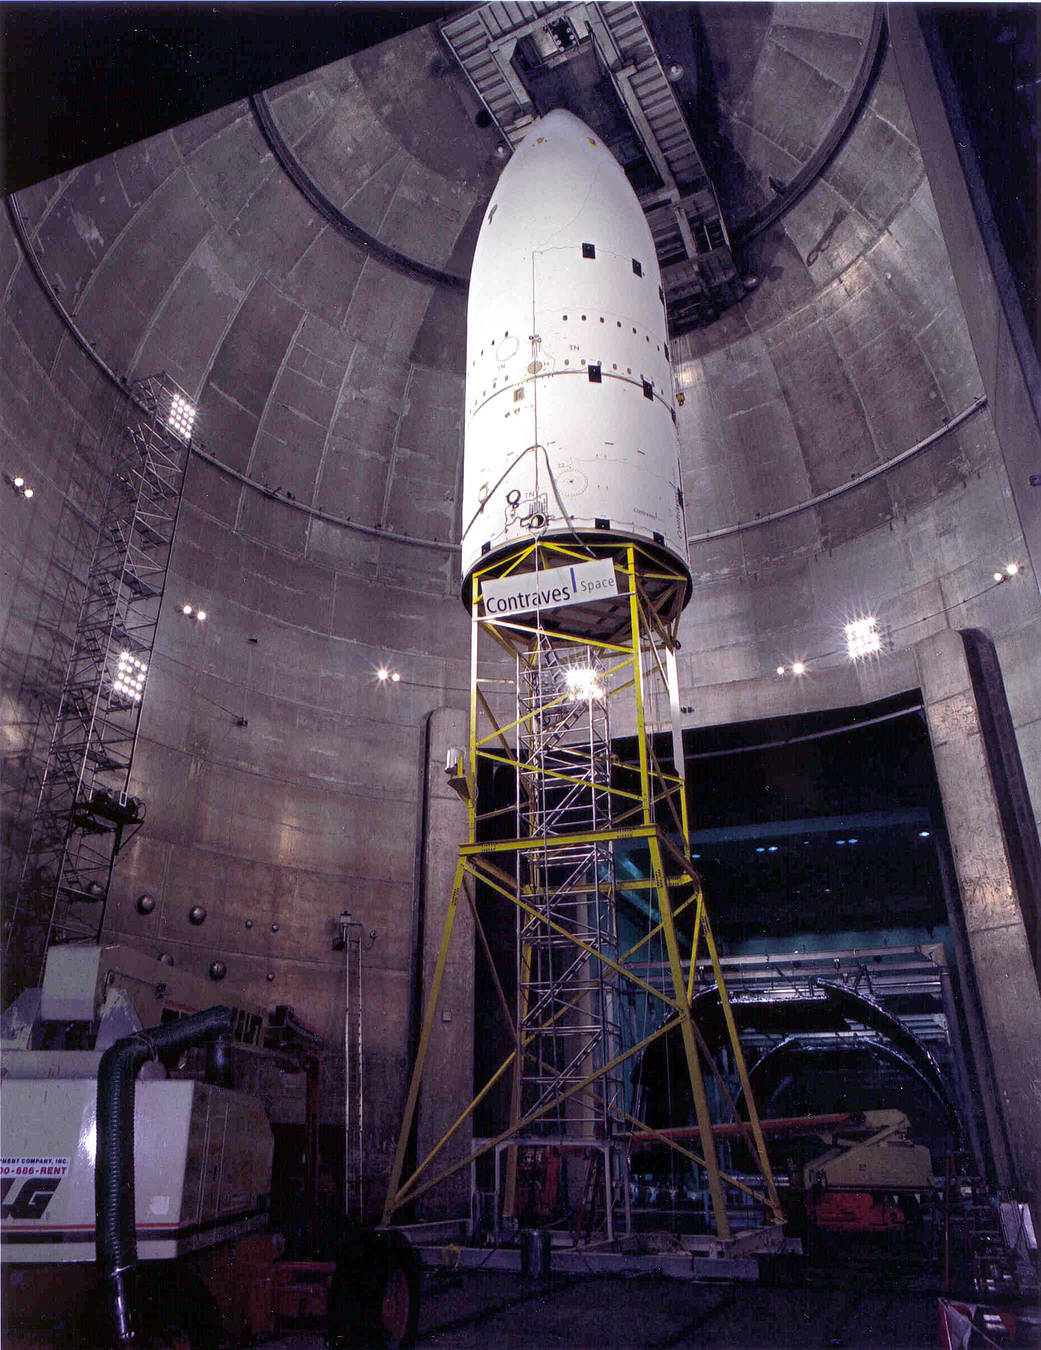 Large silver chamber with white cone shaped rocket nose on yellow scaffold in center